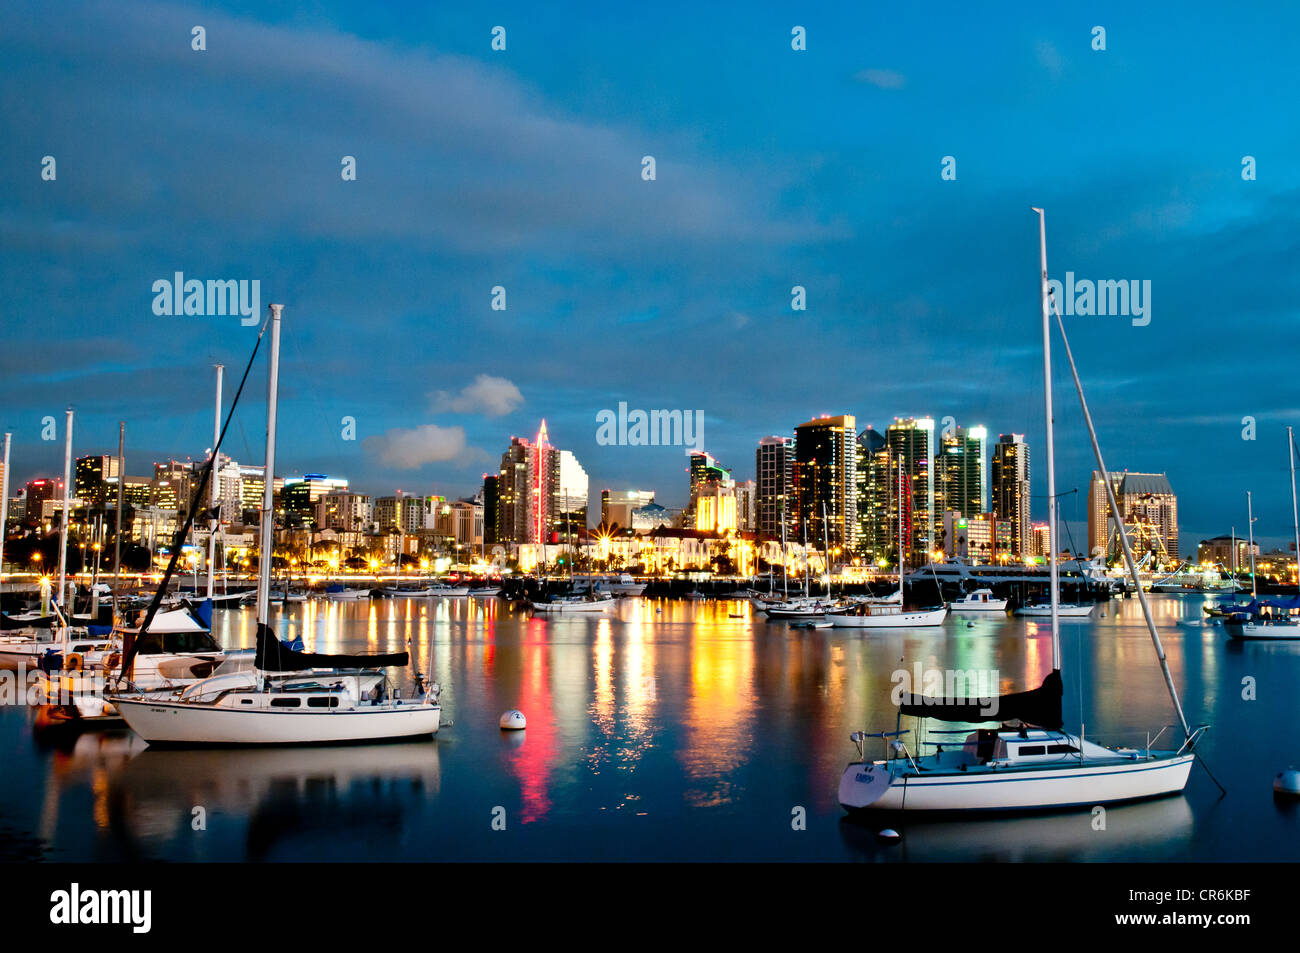 Sailboats in San Diego marina with city lights in background Stock Photo